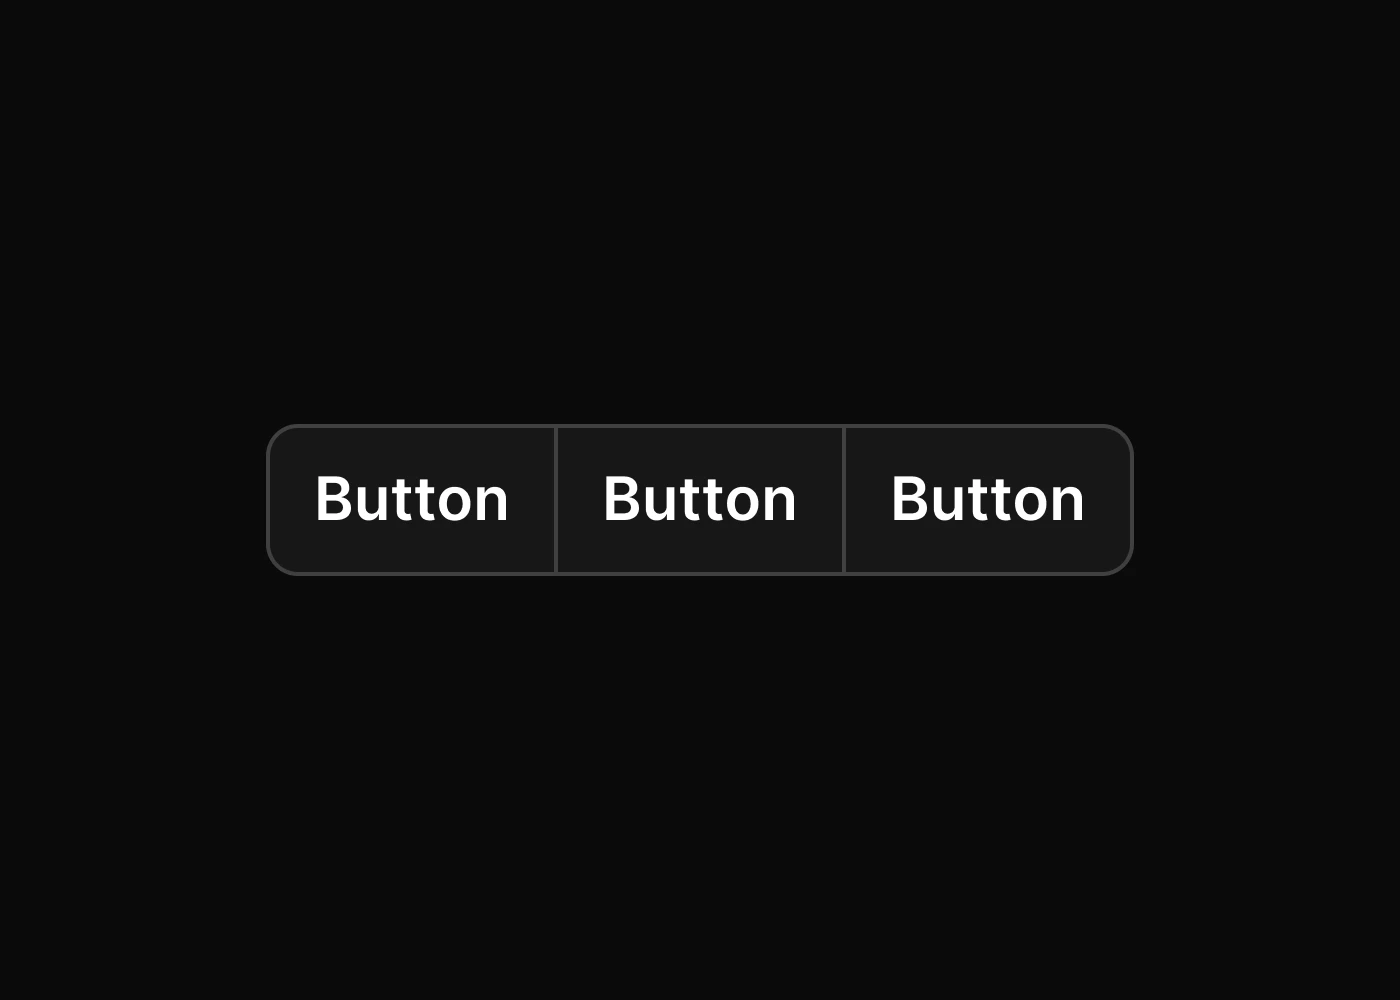 Button Group